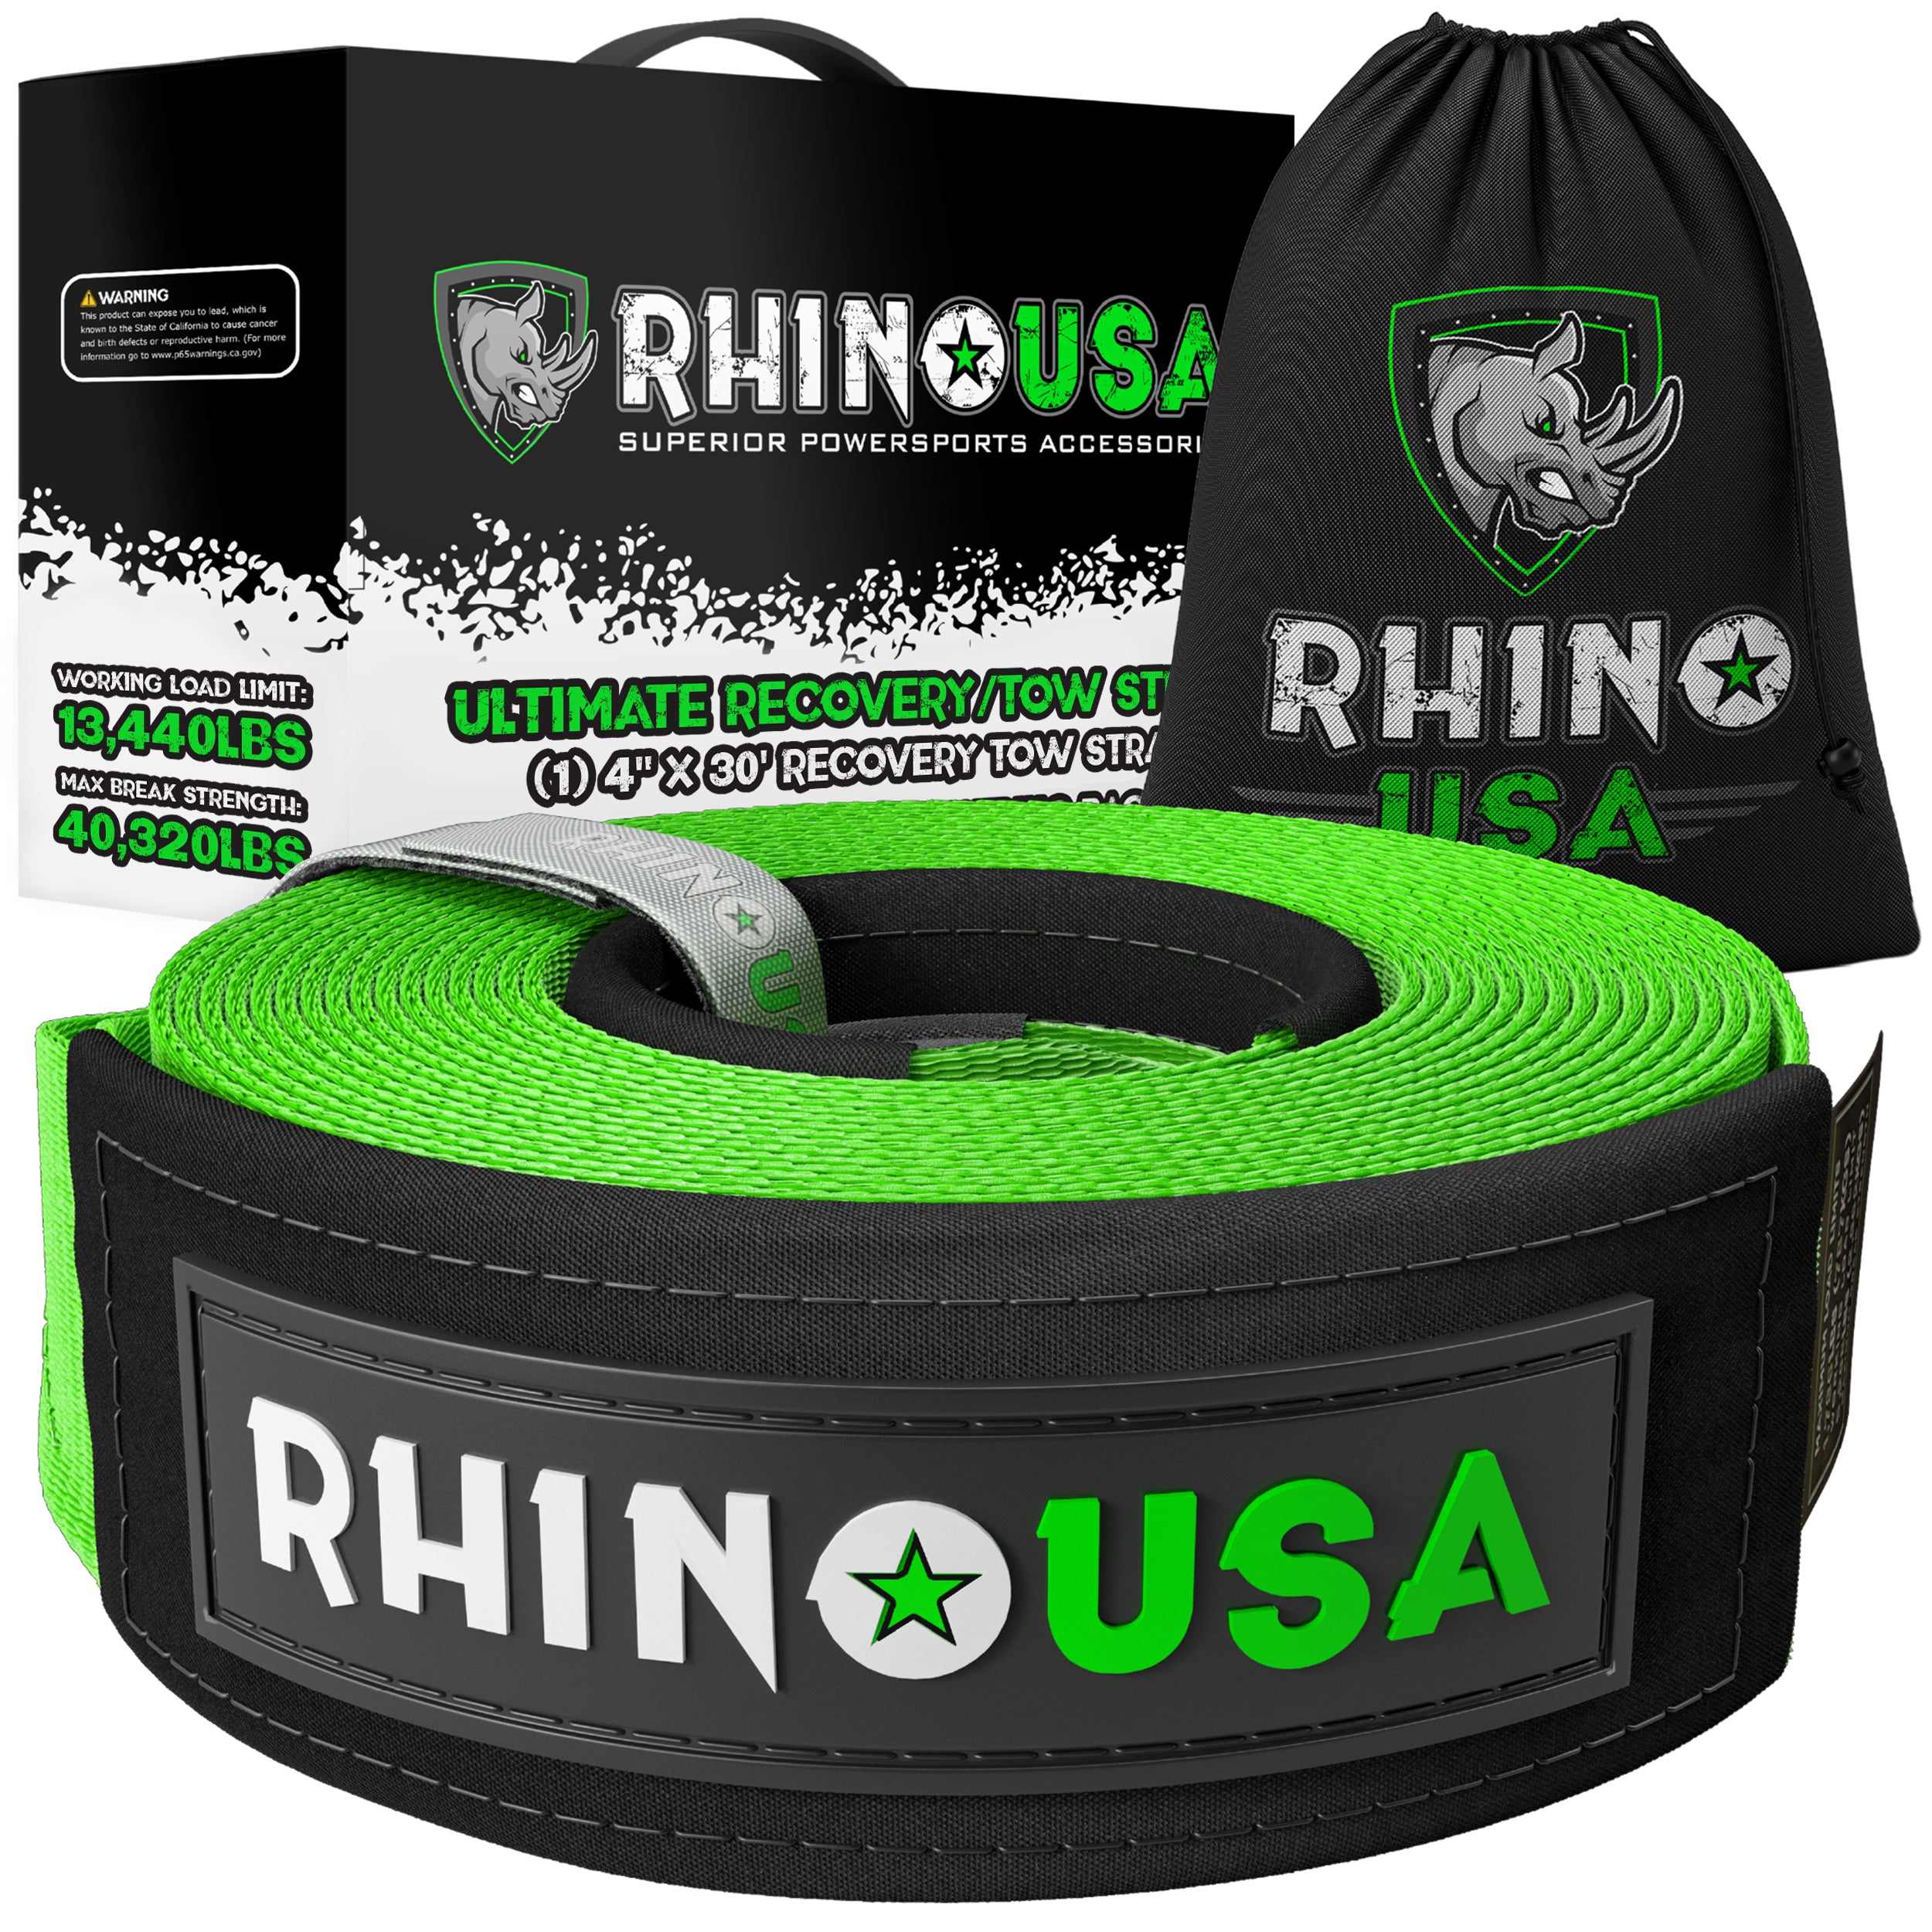 Best Ultimate Recovery/Tow Strap 4 x 30 ft - Rhino USA